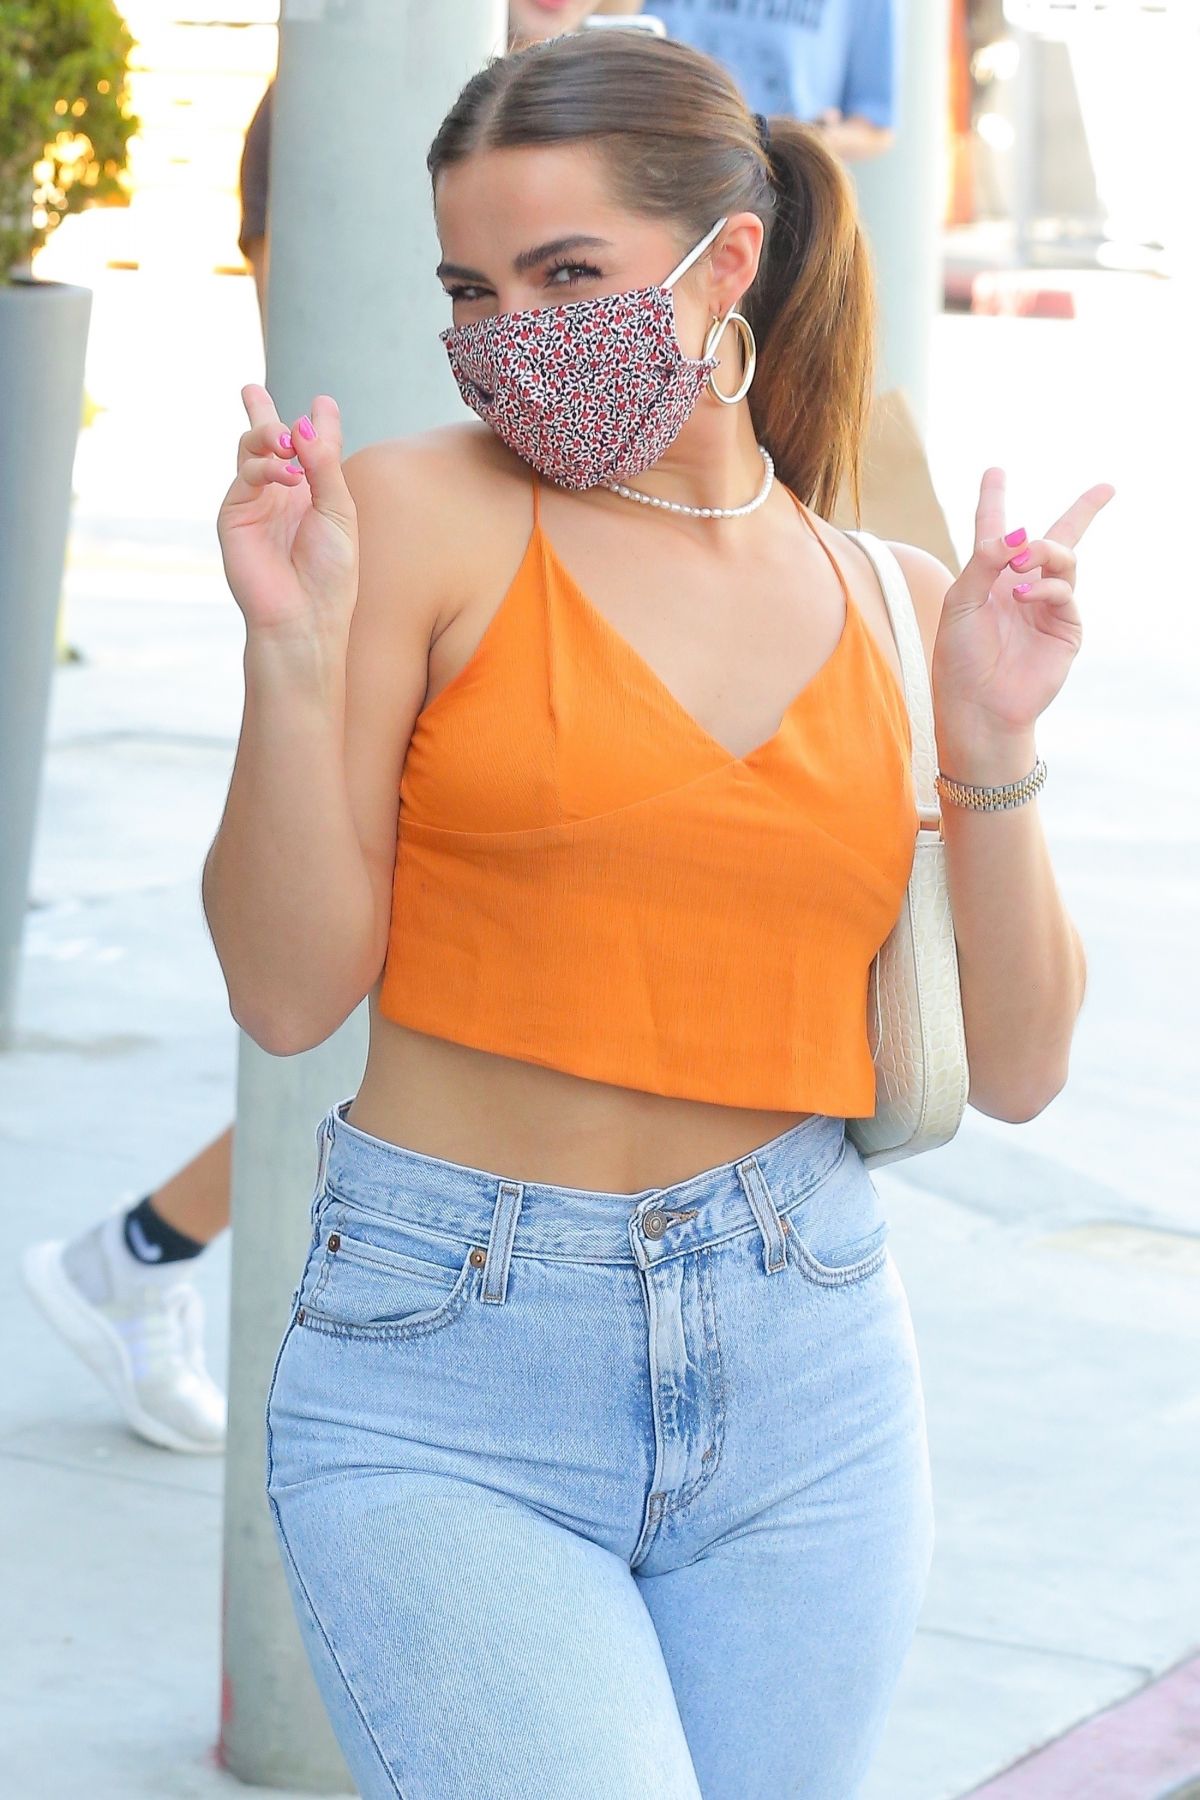 Addison Rae at Urth Cafe in West Hollywood 2020/09/20 18